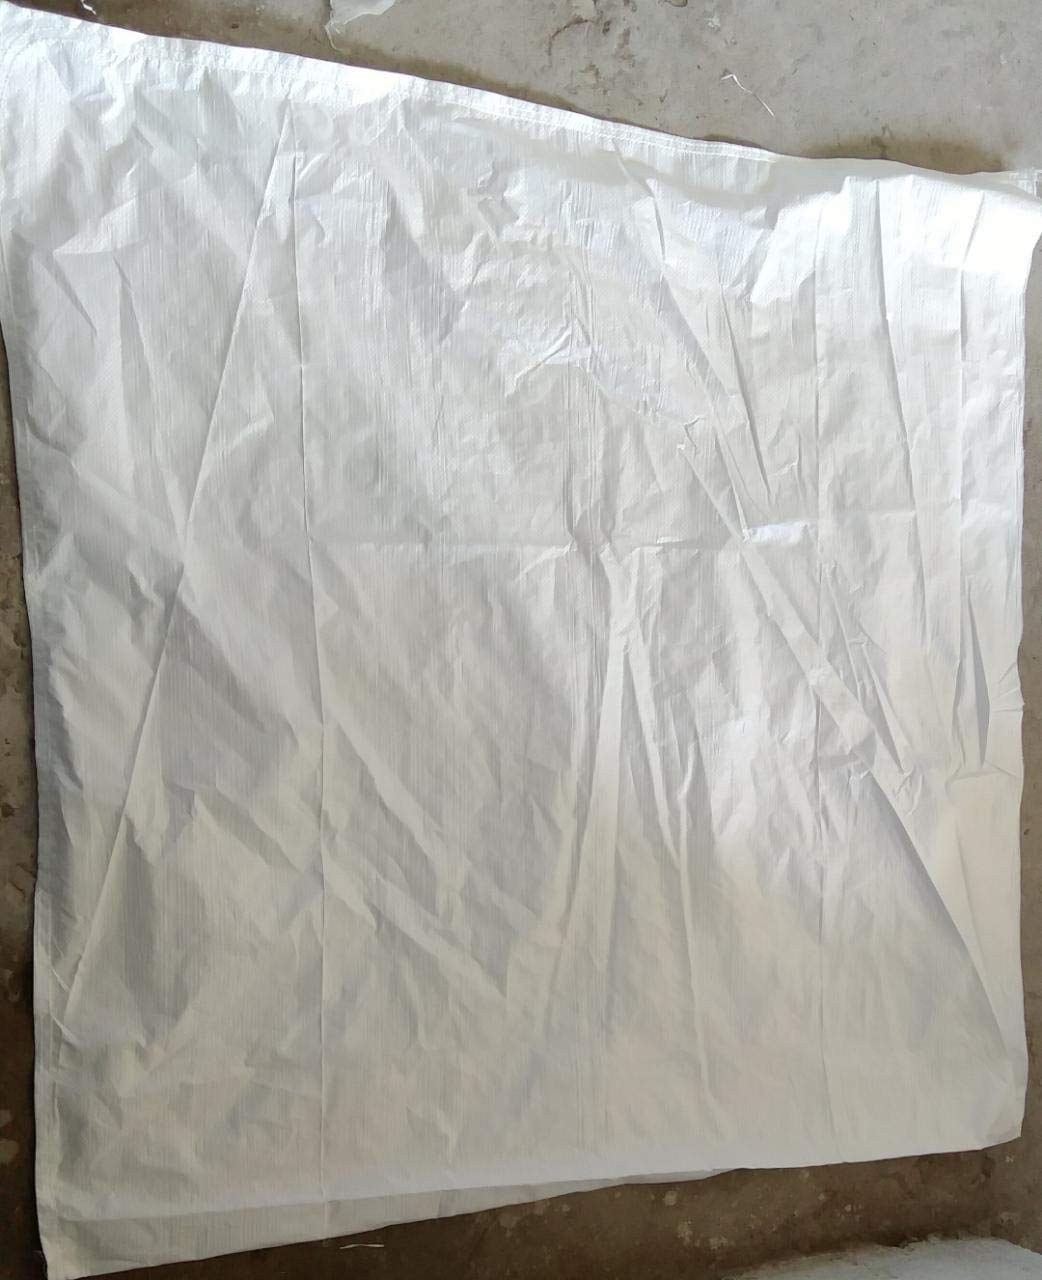 Empty White Big Bora, Large HDPE Bori for Packing of Food, bori Bags Packing Parcels Goods Items (Size 60x65 Inch) (Pack of 10) (52x75 Inch, Set OF 10)